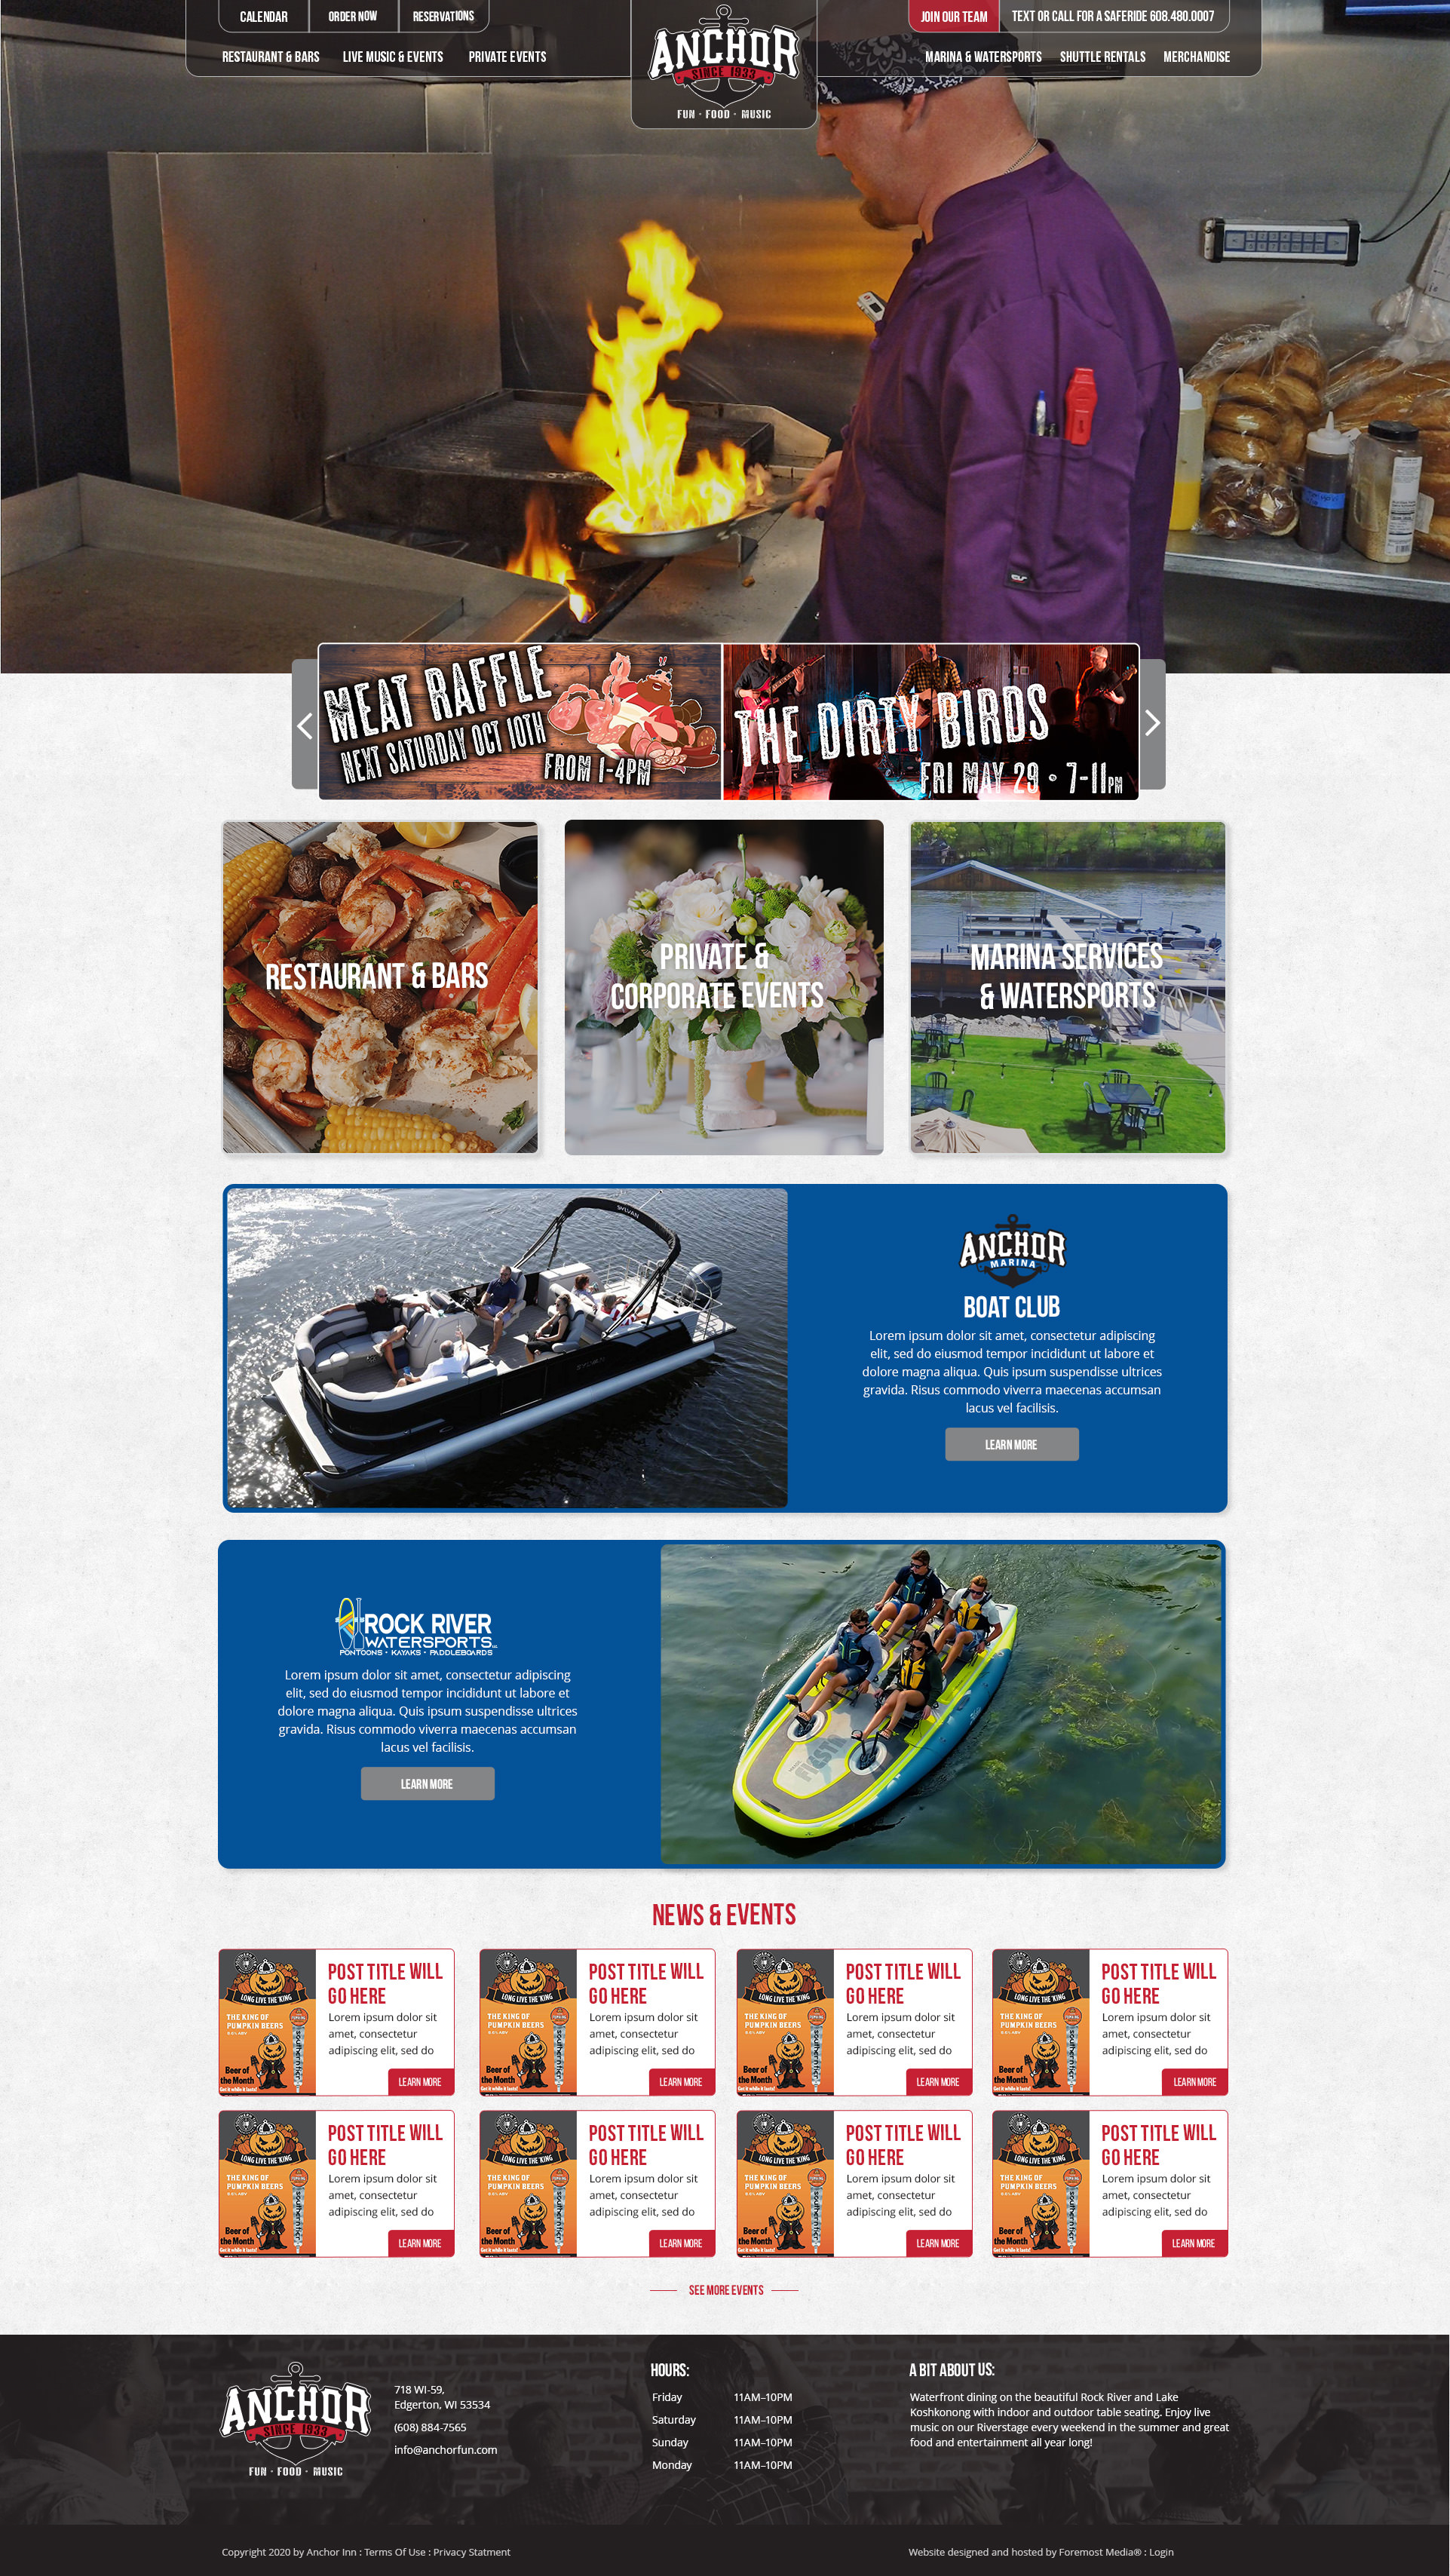 Example of the new and improved DNN website designed by Foremost Media for Anchor Inn Bar & Grill